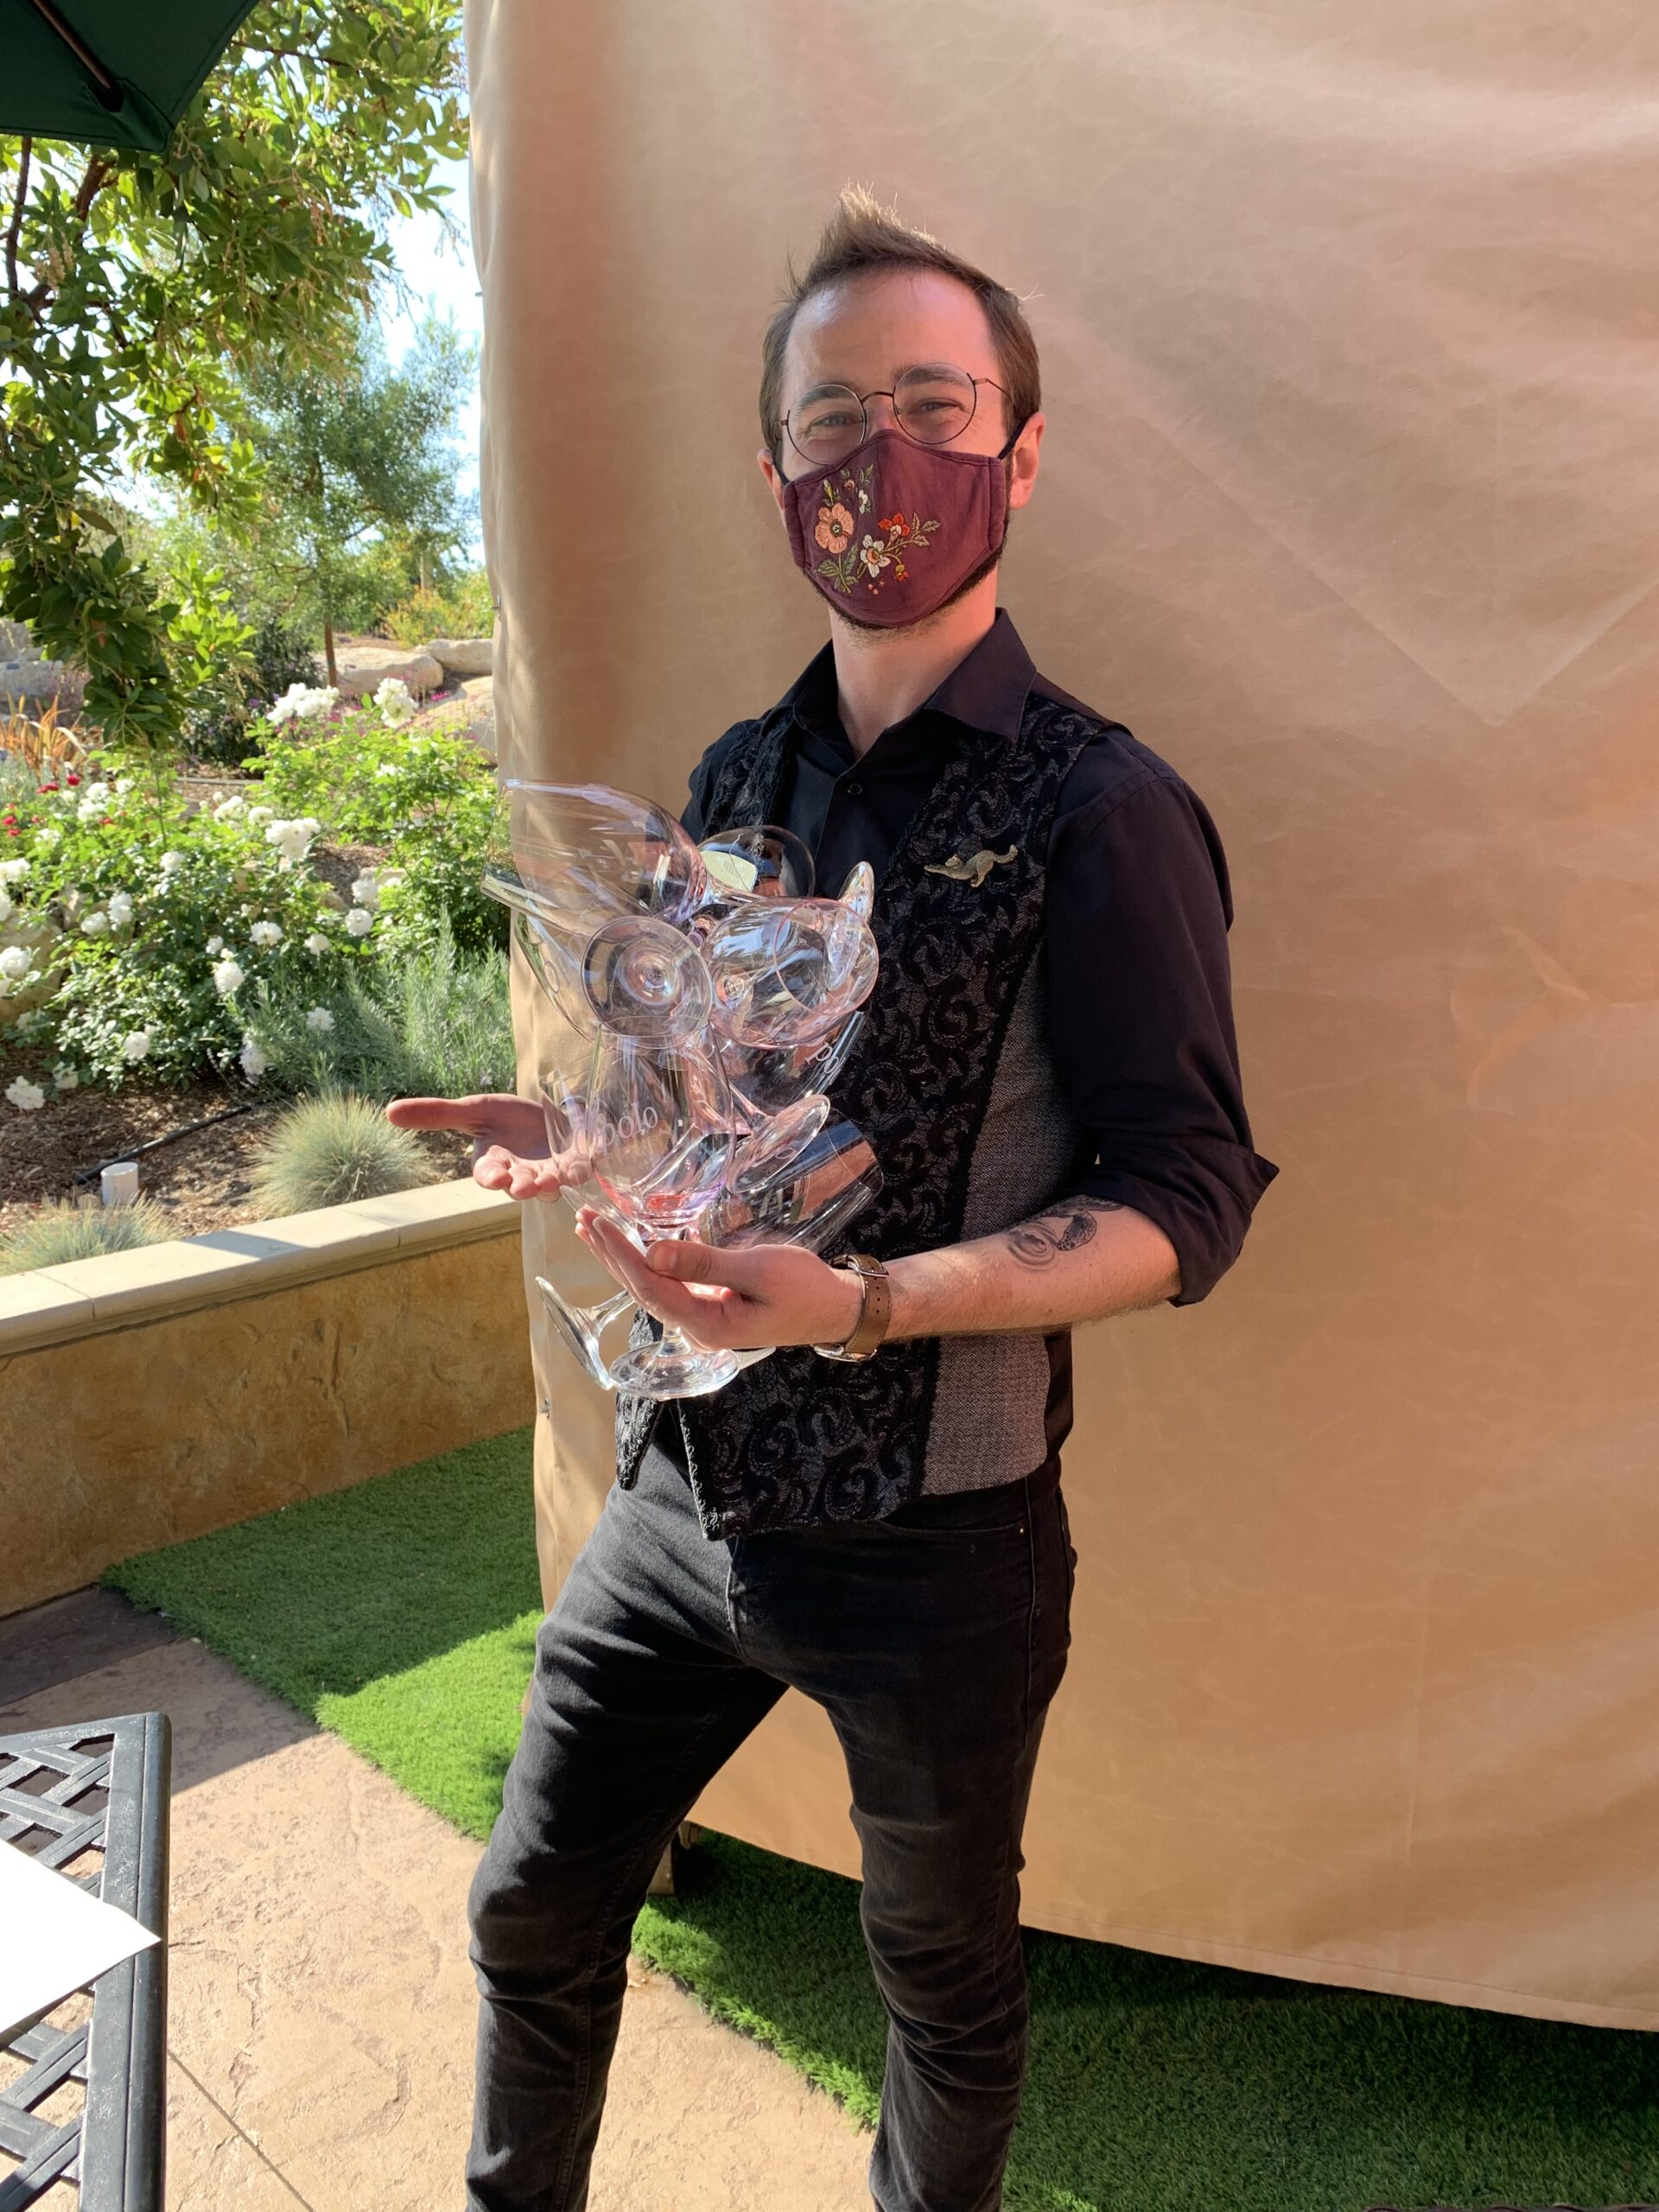 Opolo Vineyard employee in a mask holding a large amount of empty wine glasses